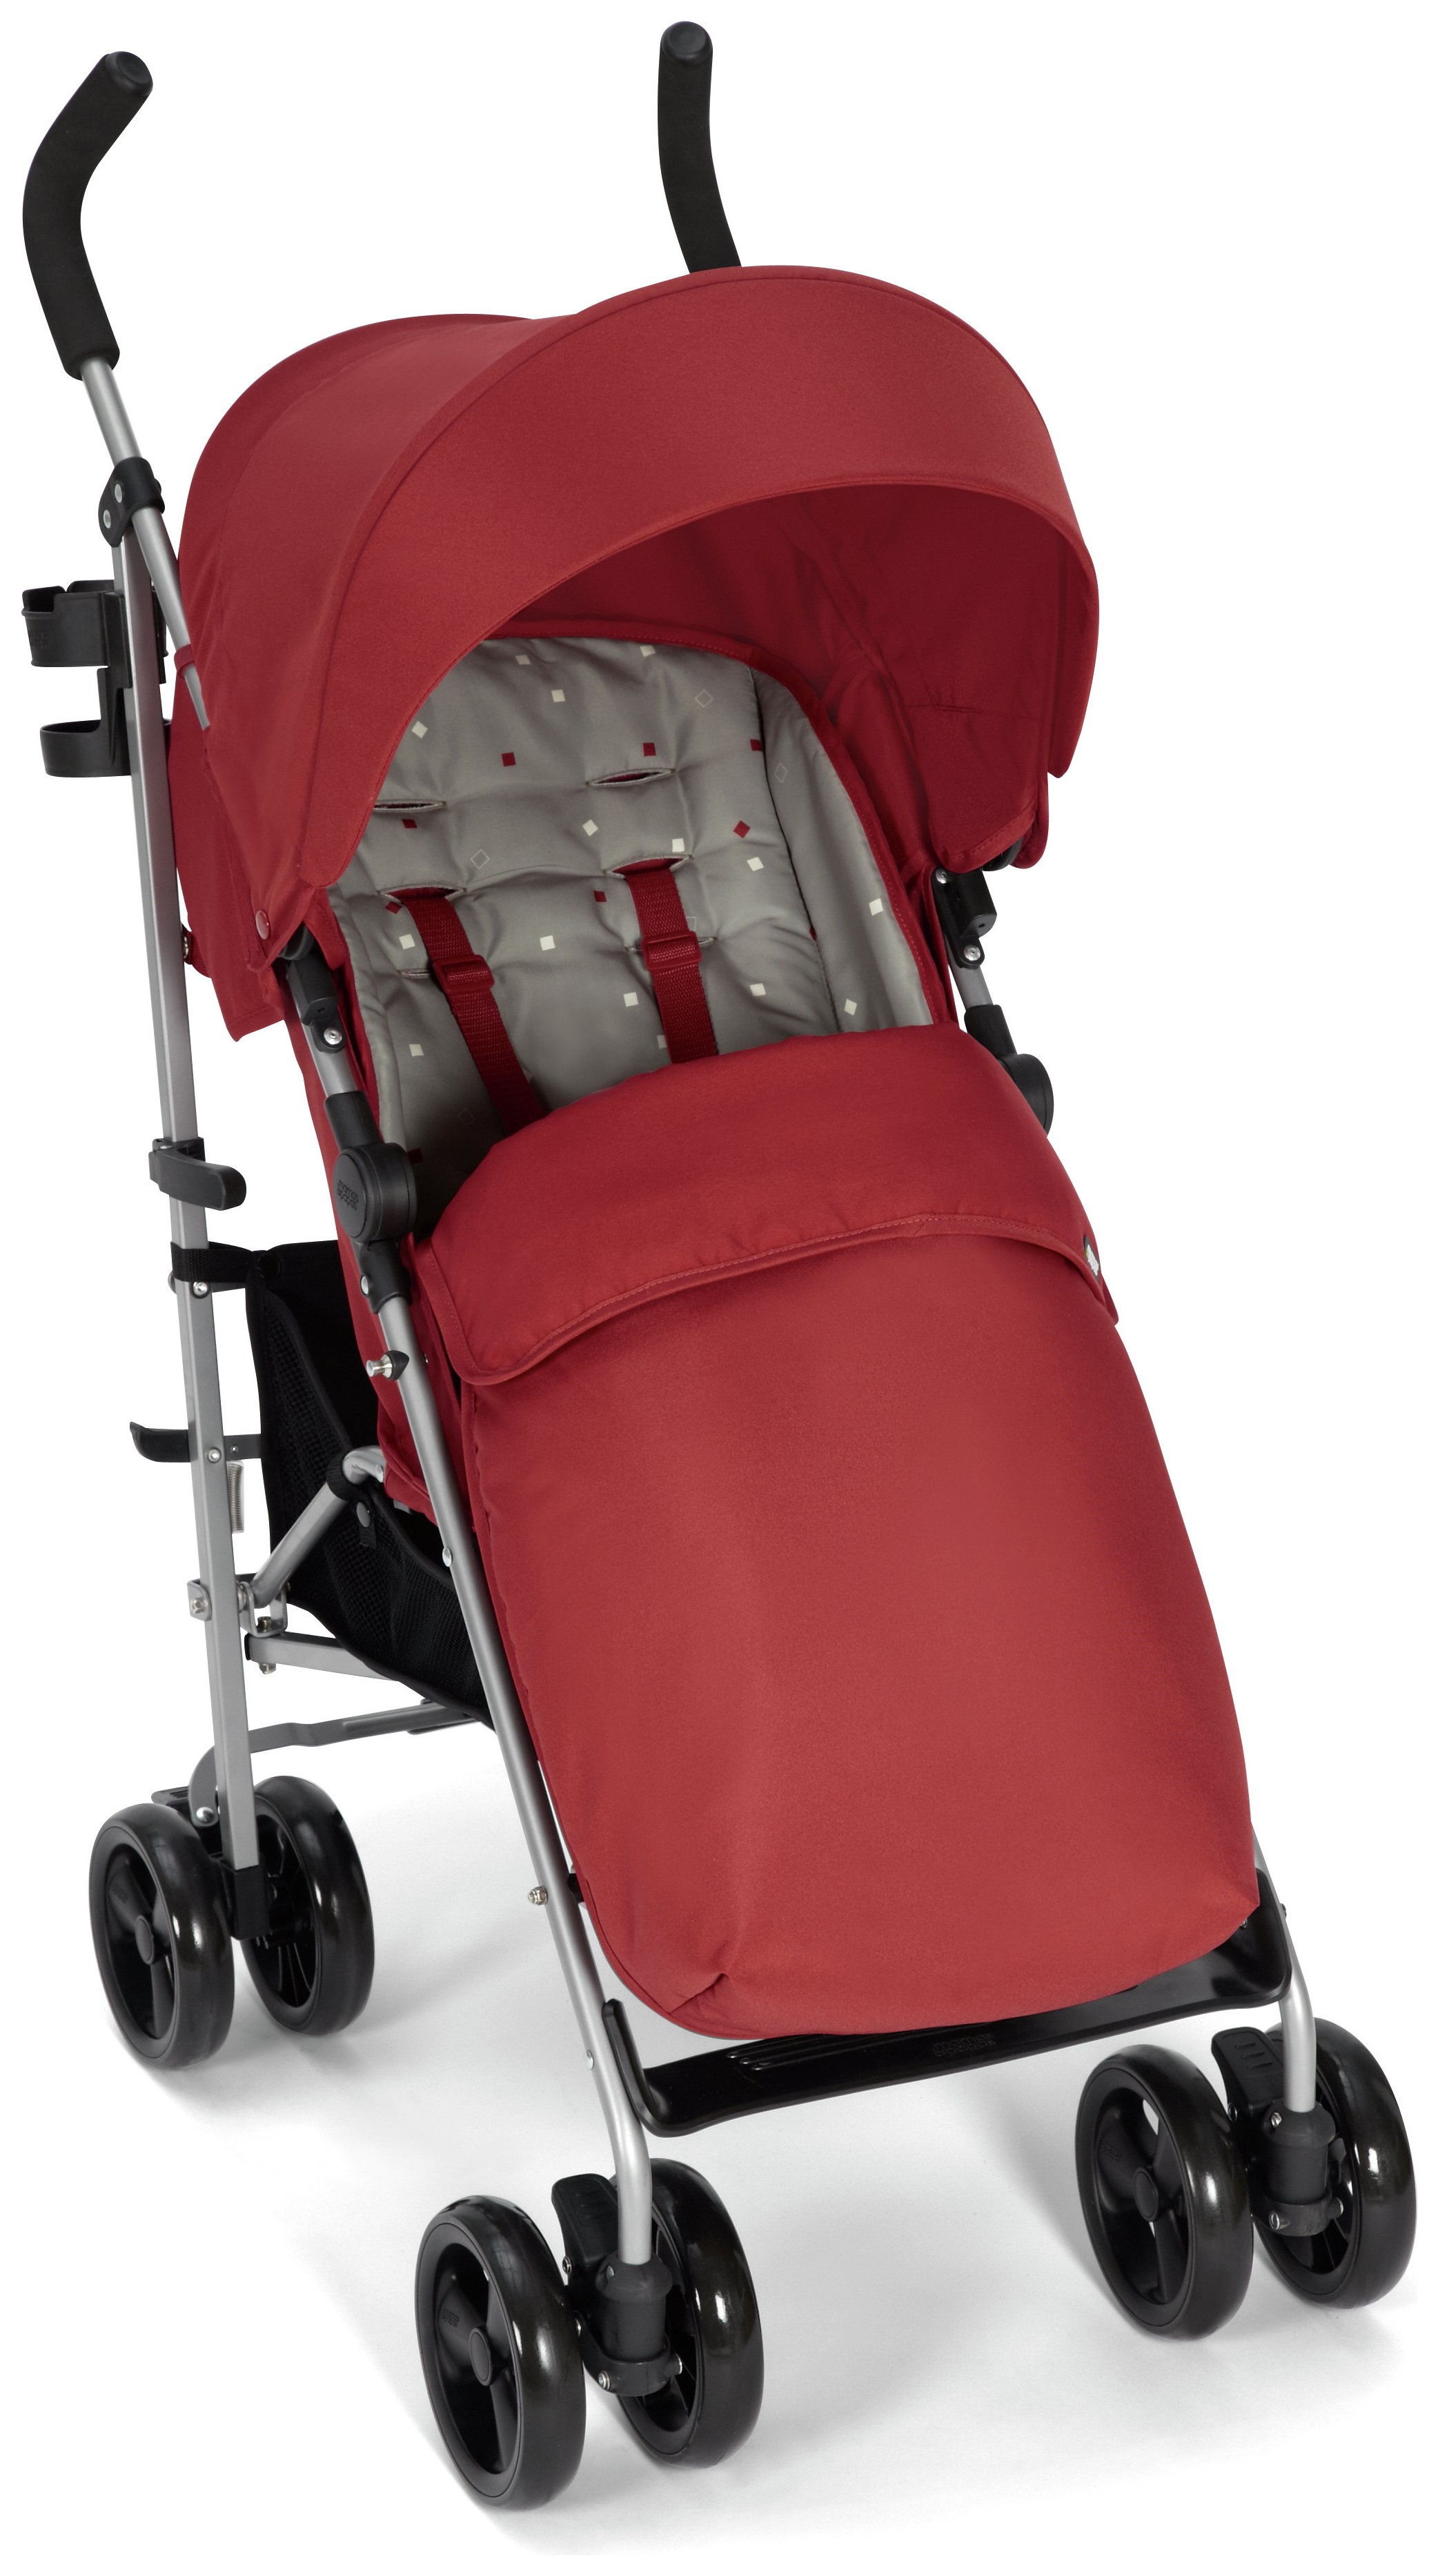 mamas and papas cruise stroller review